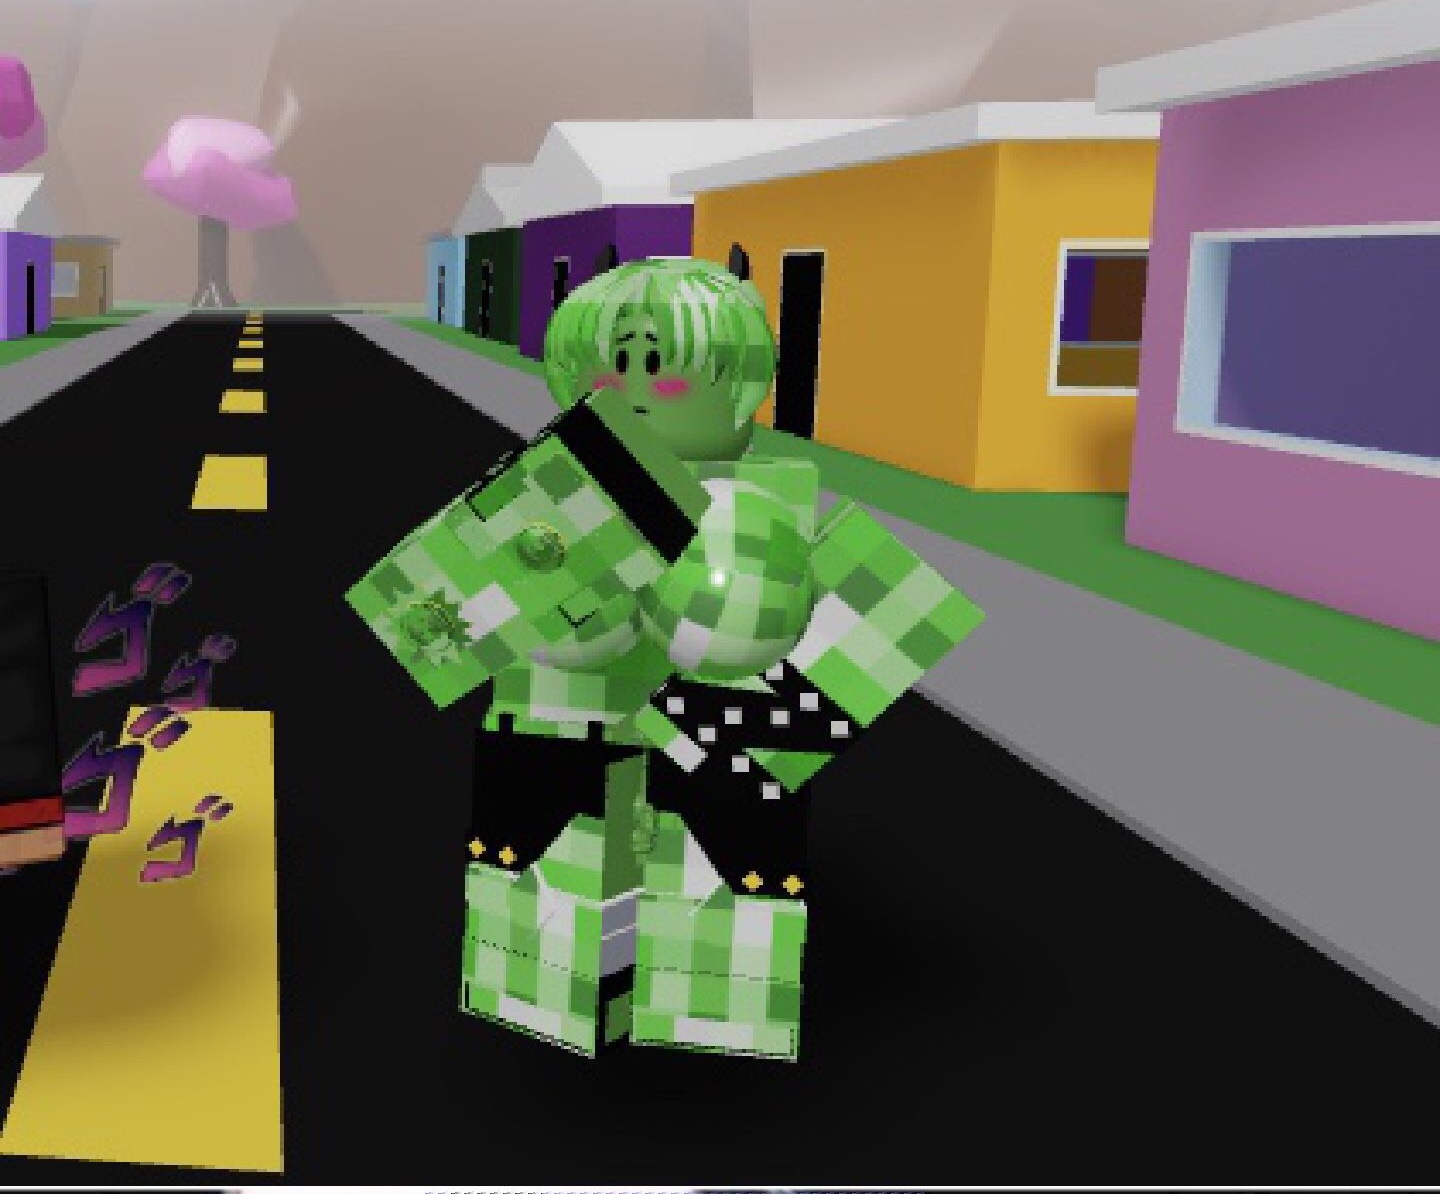 I Thought Cq Would Be Safe From This Chaos But I Was So Wrong Fandom - imagenes de la cq roblox